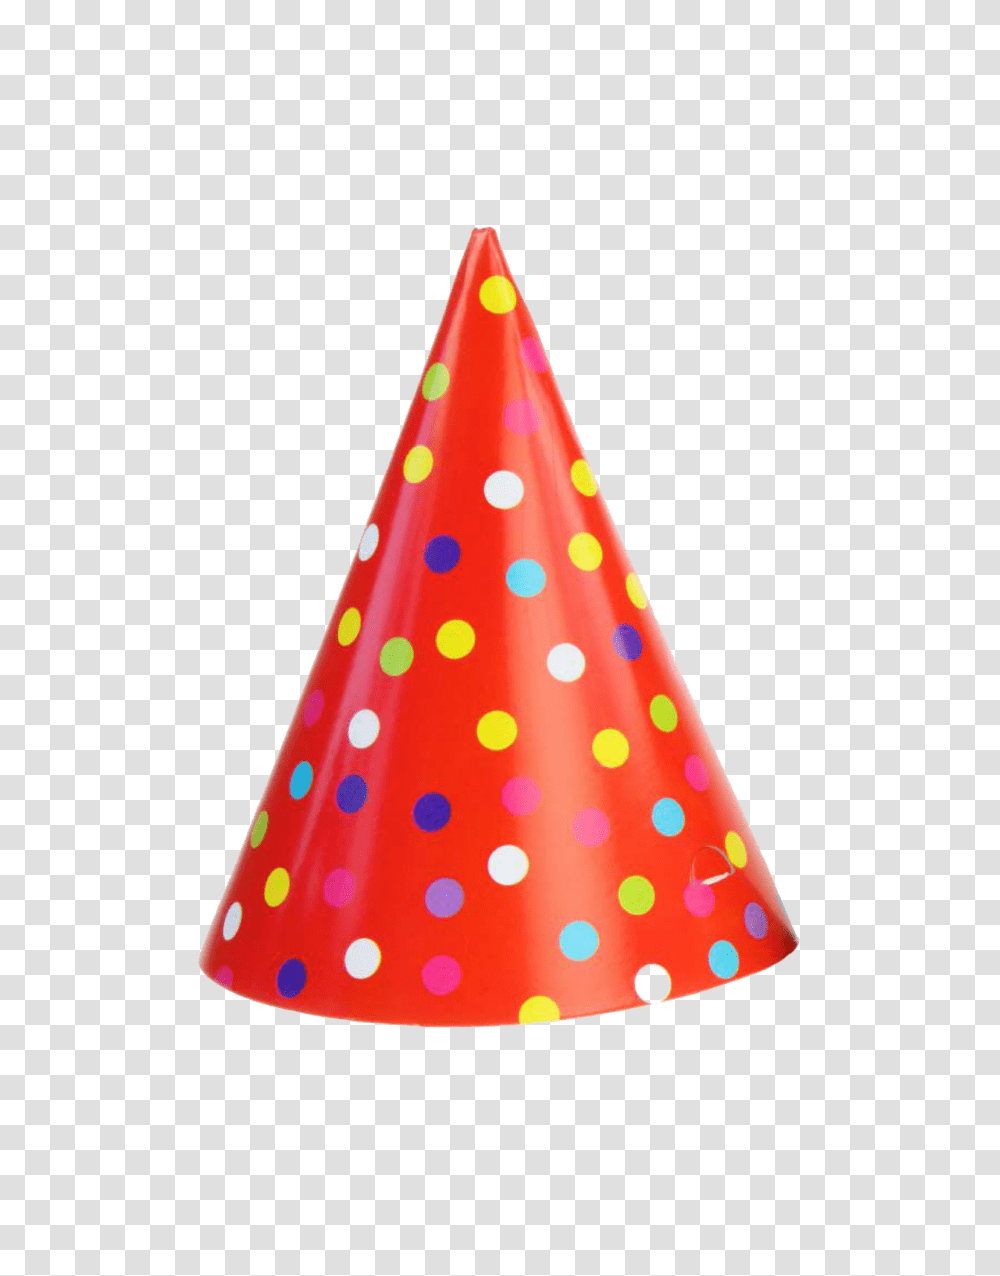 Download Free Party Hat File Vector Clipart Psd Birthday Party Hat, Clothing, Apparel, Cone, Christmas Tree Transparent Png